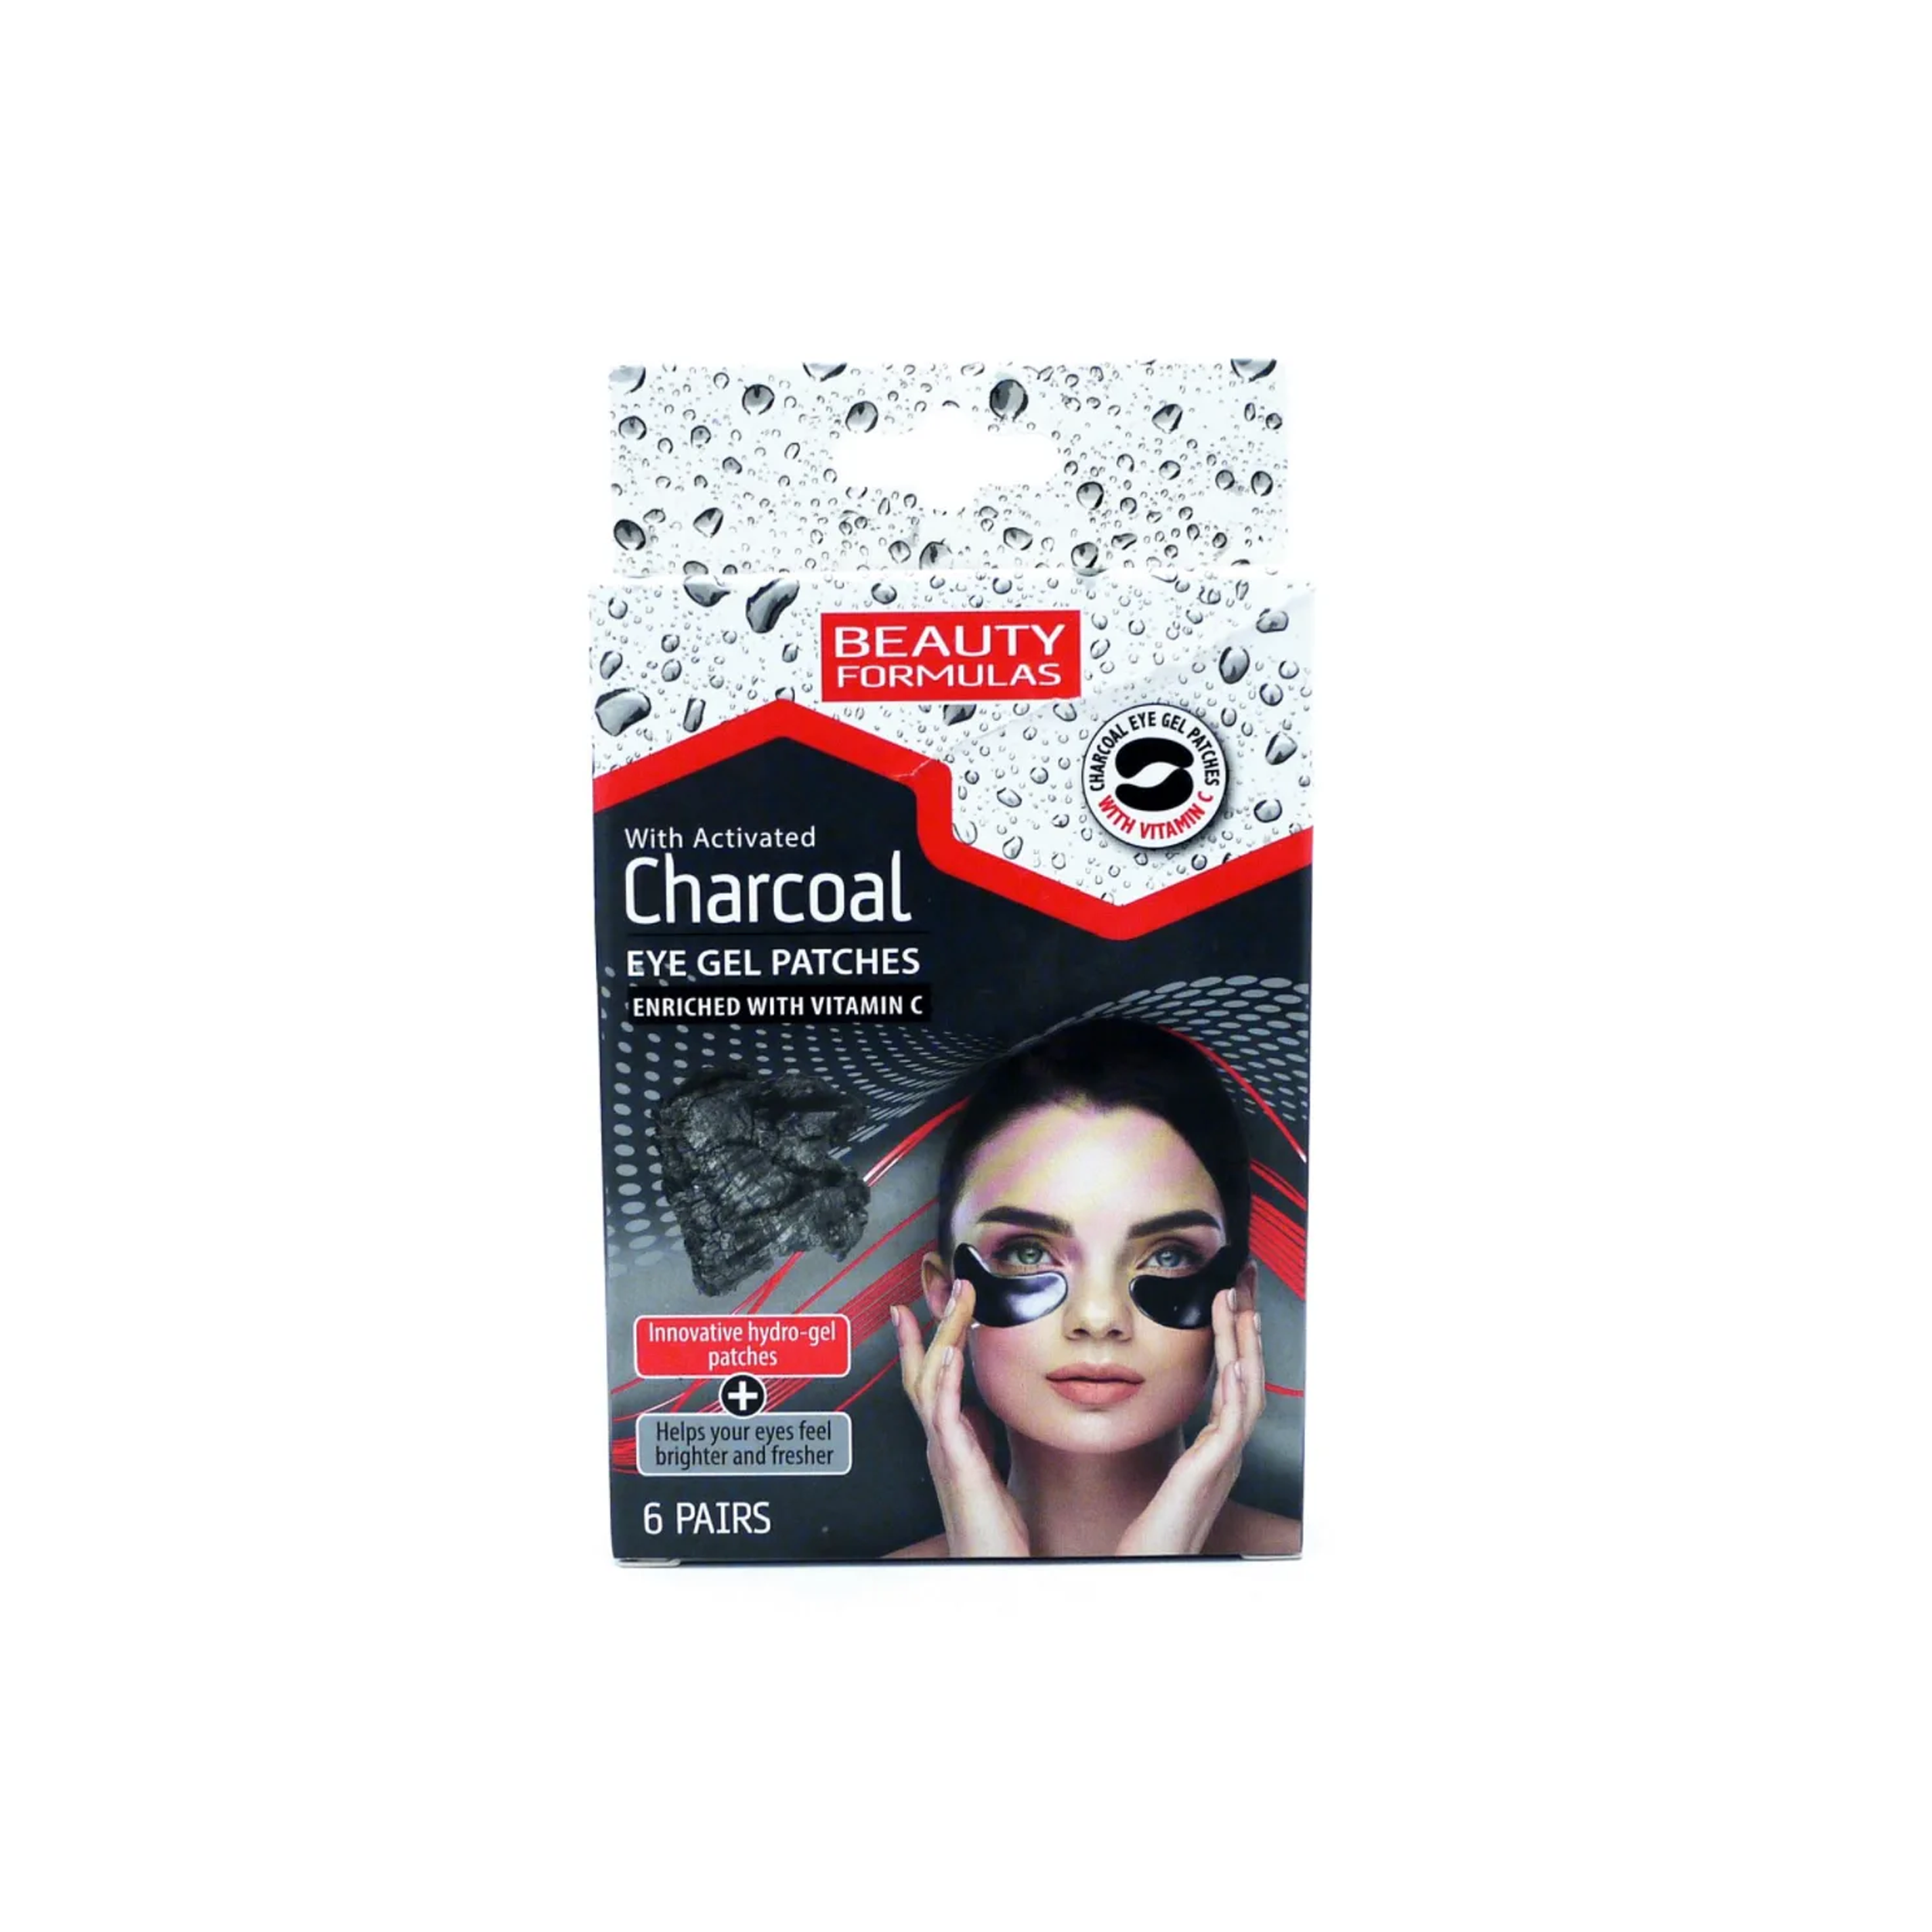 BF CHARCOAL EYE GEL PATCHES 6S 12867